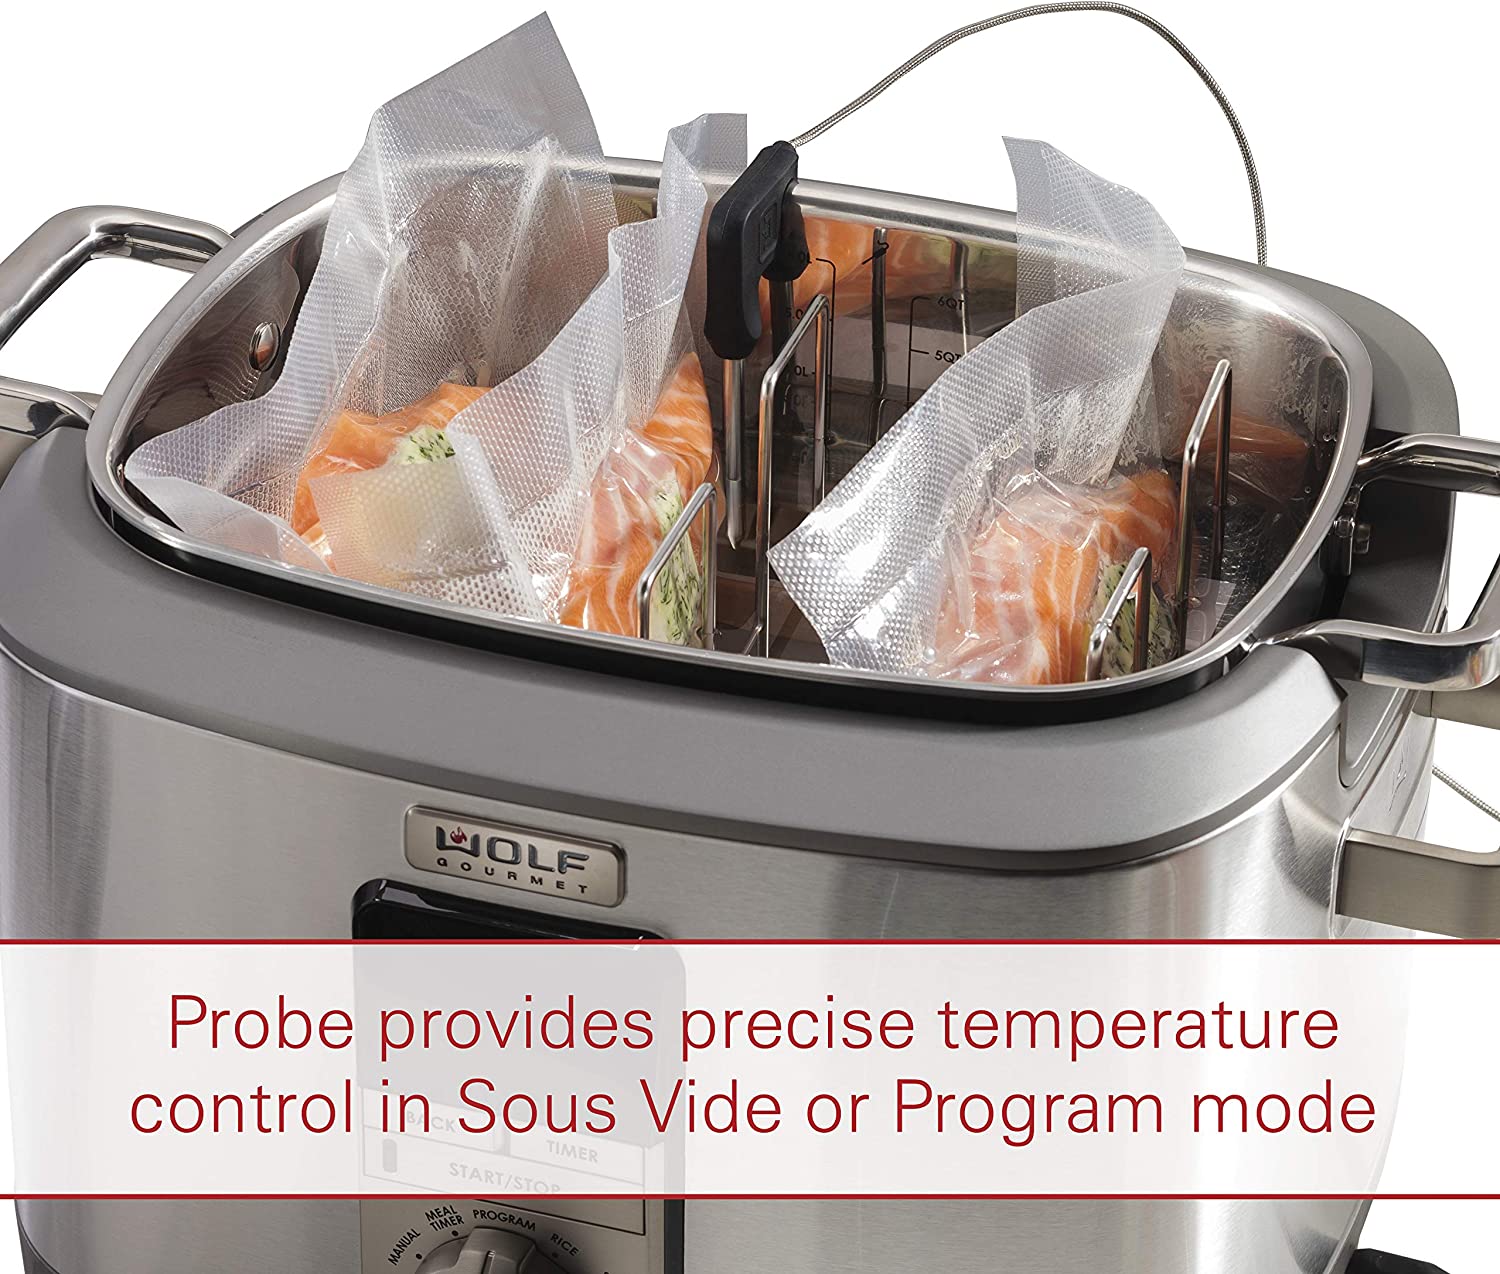 Wolf Gourmet Programmable 6-in-1 Multi Cooker with Temperature Probe, 7 qrt, Slow Cook, Rice, Sauté, Sear, Sous Vide, Stainless Steel, Red Knob (WGSC100S)